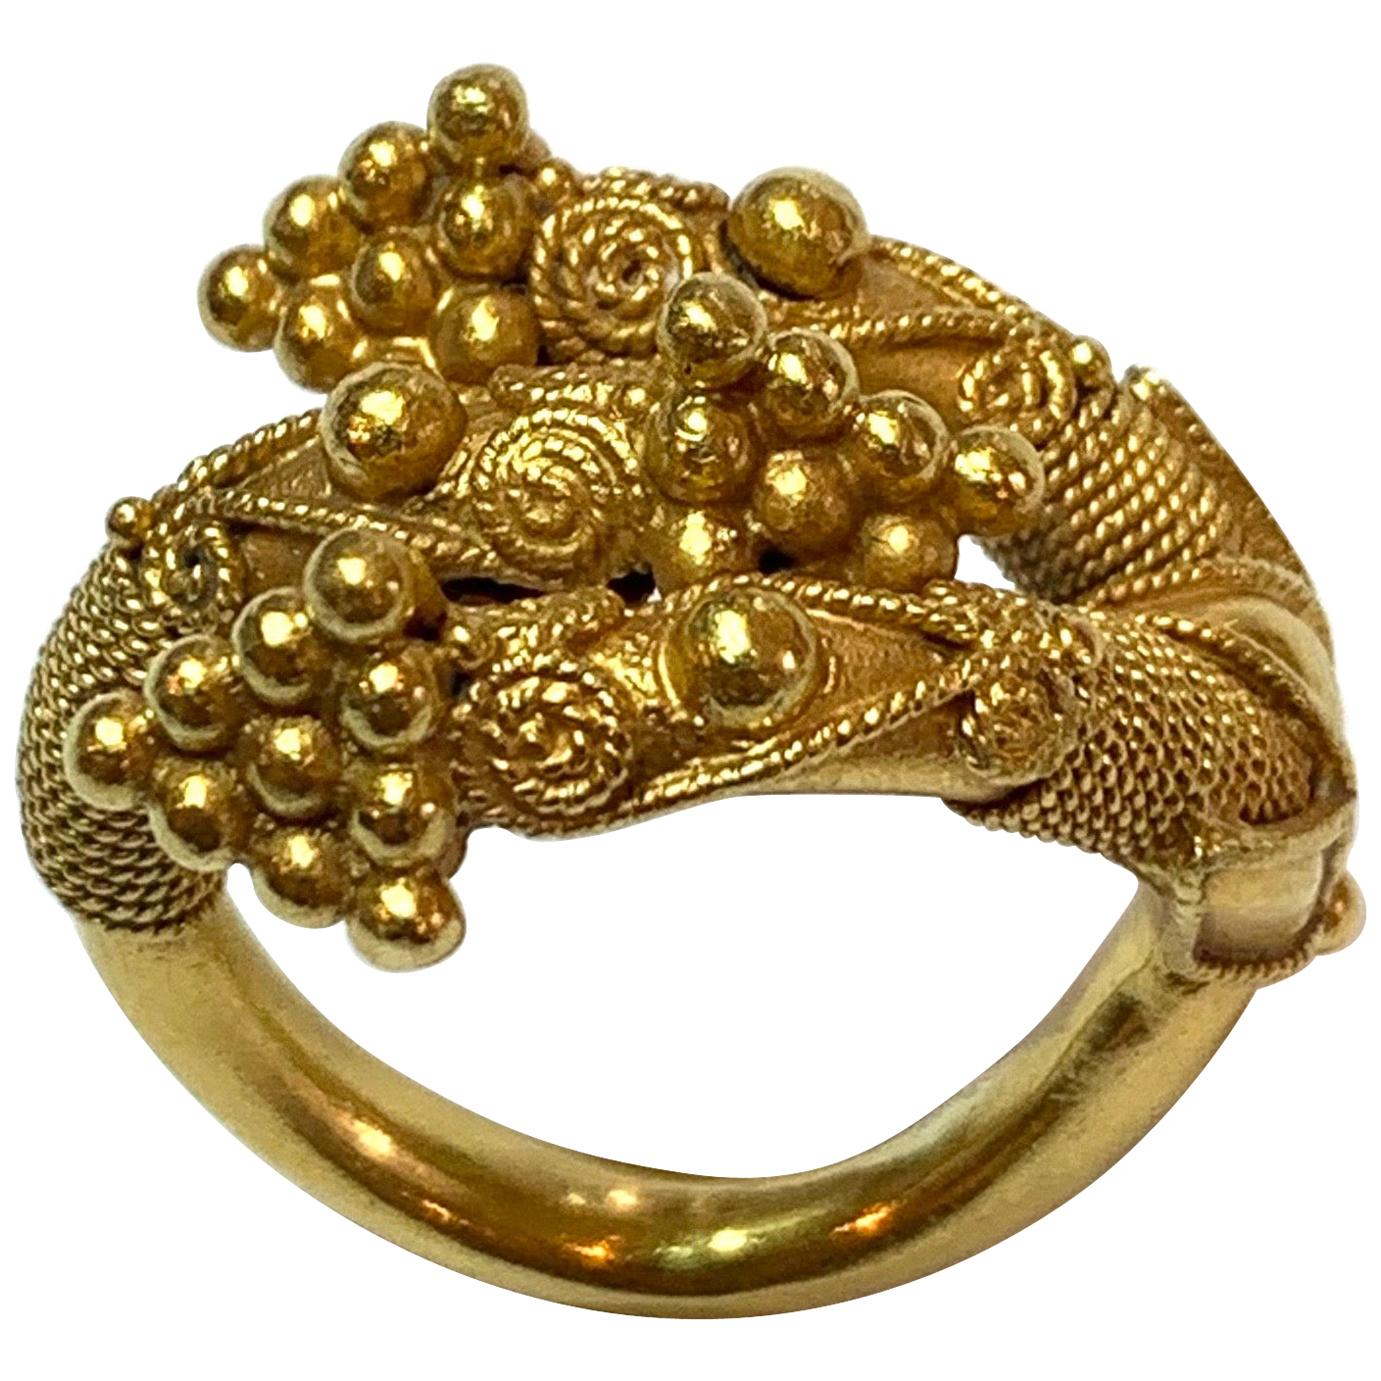 Lalaounis, 18 Carat Gold Etruscan Revival Ring, circa 1970s For Sale